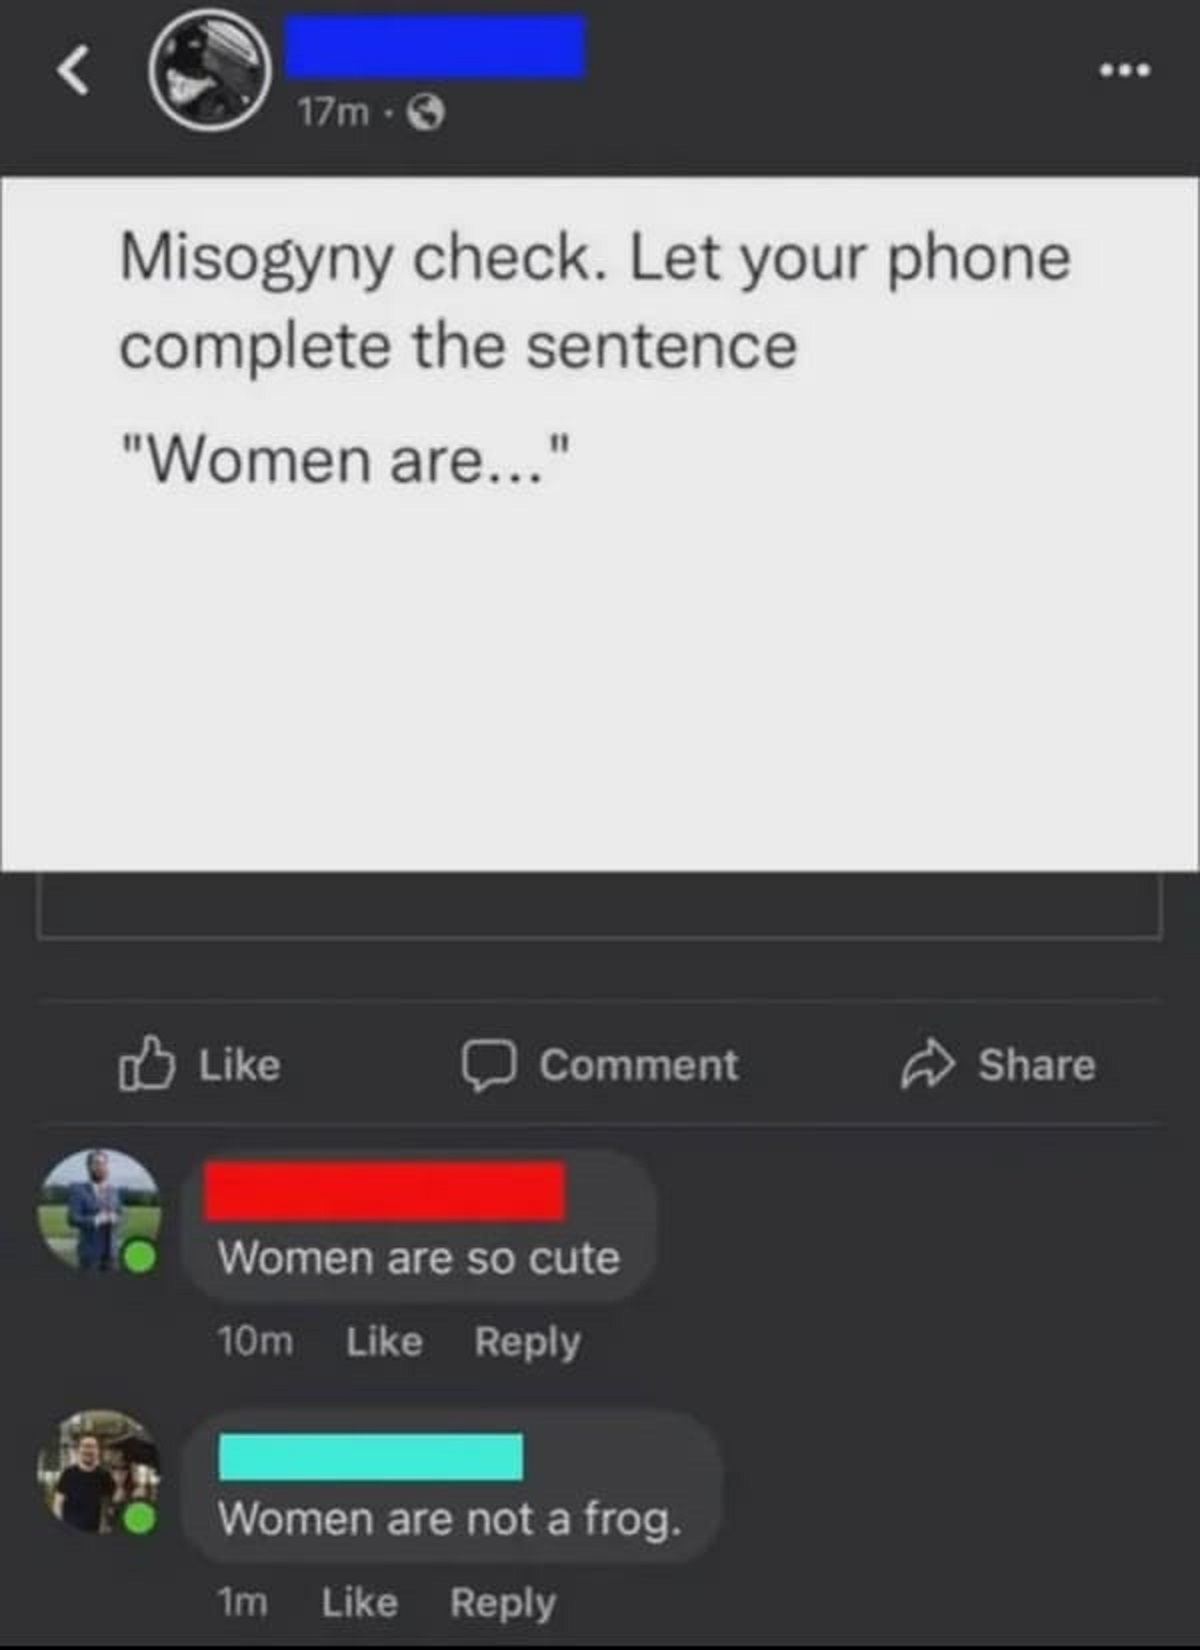 screenshot - 17m. Misogyny check. Let your phone complete the sentence "Women are..." Comment Women are so cute 10m Women are not a frog. 1m